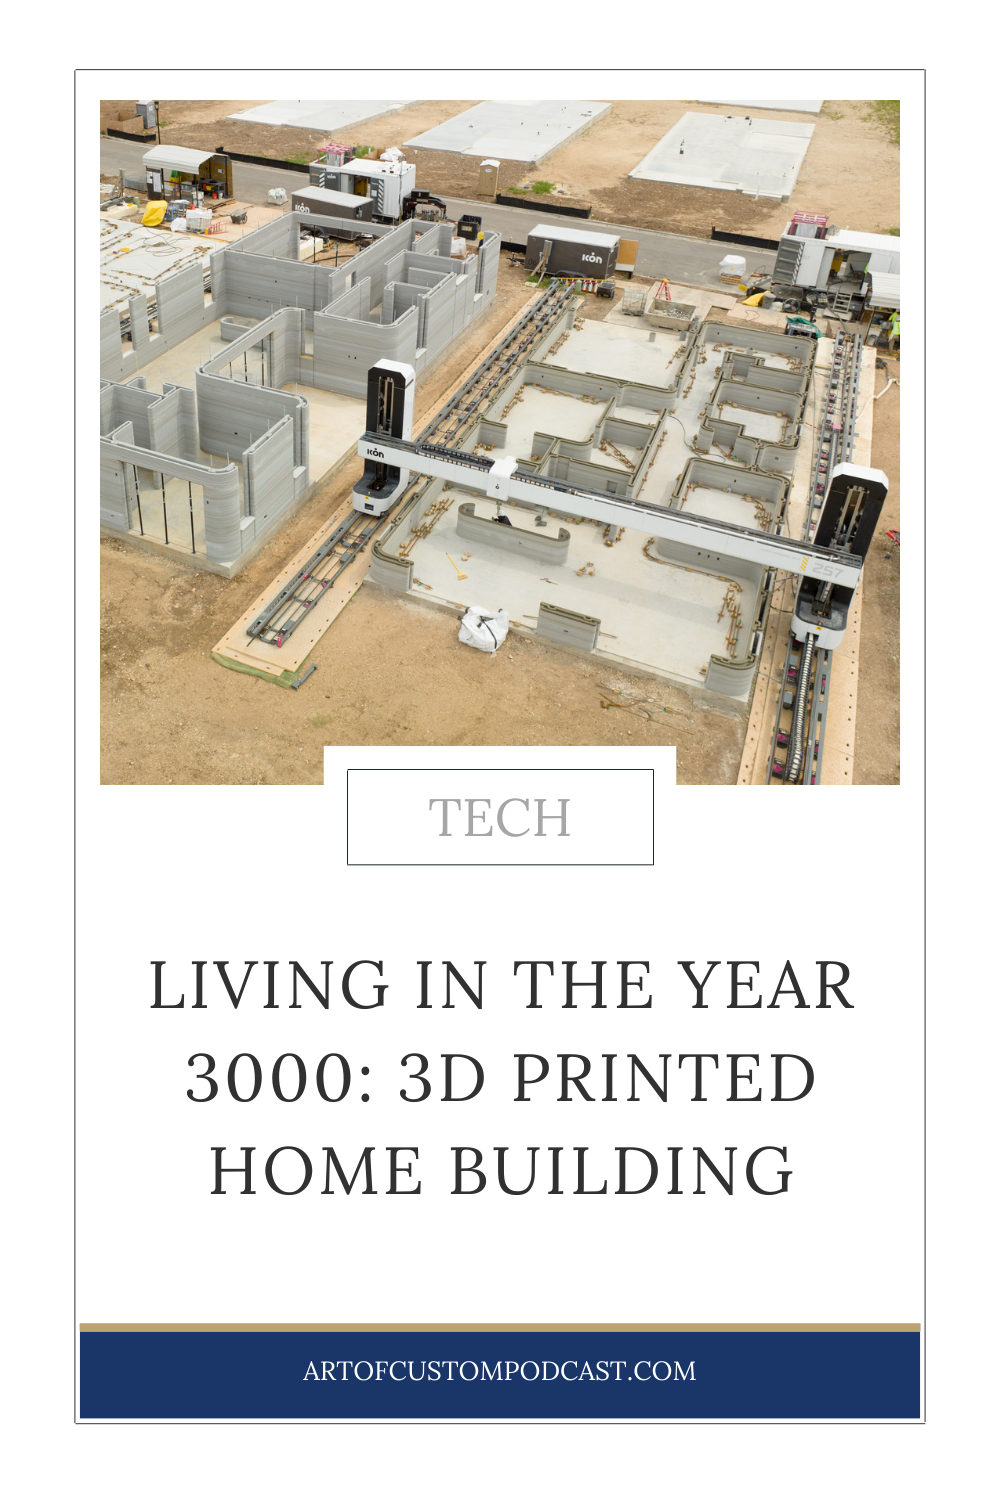 ICON 3D Printed Homes Being Built in Texas